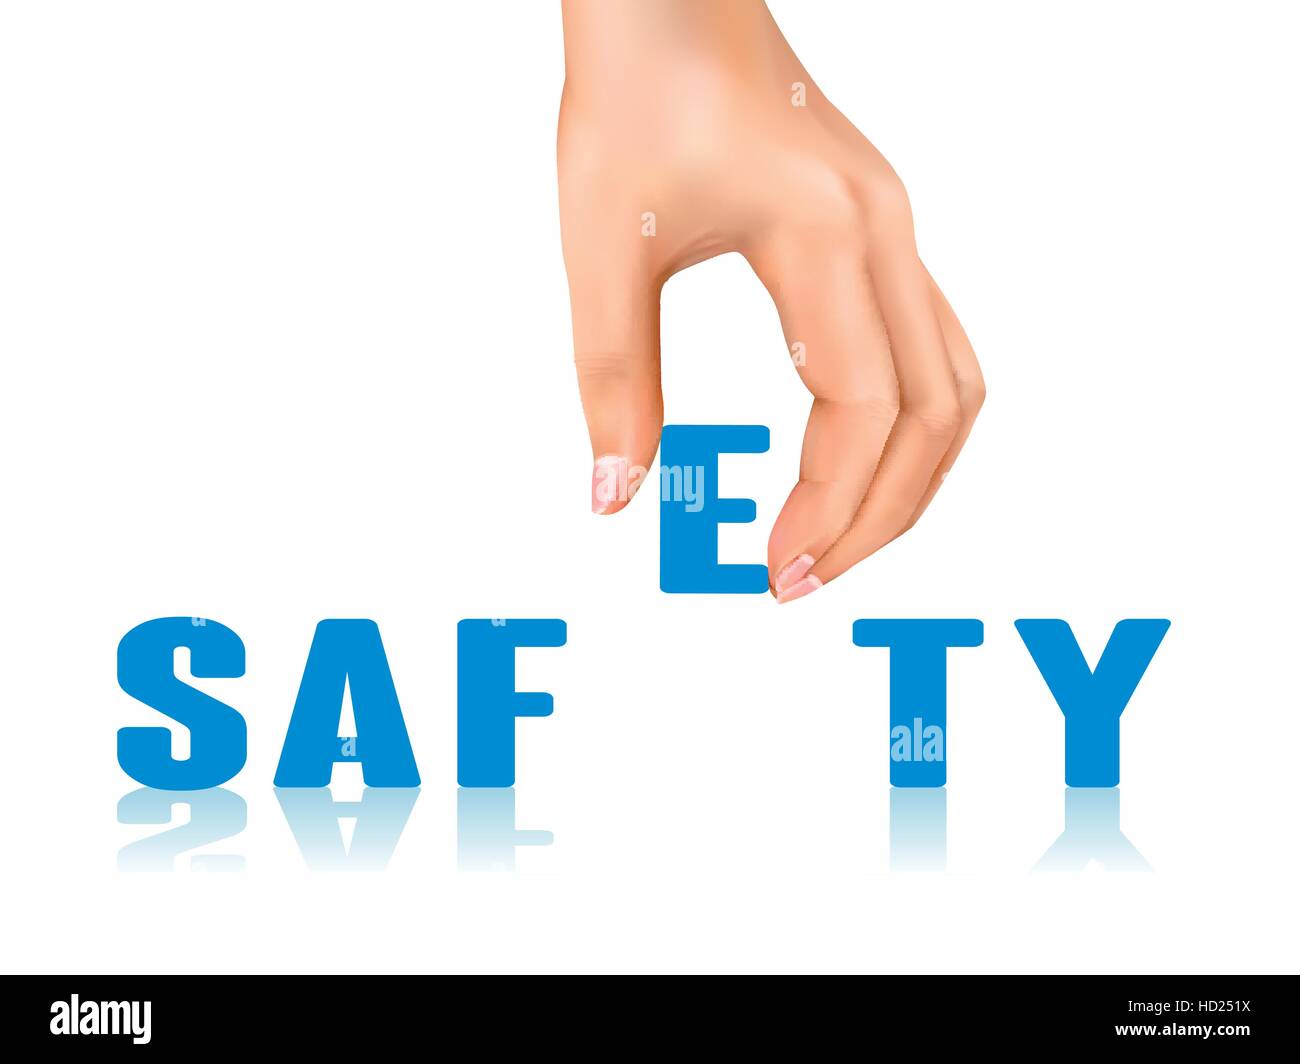 safety word taken away by hand over white background Stock Vector